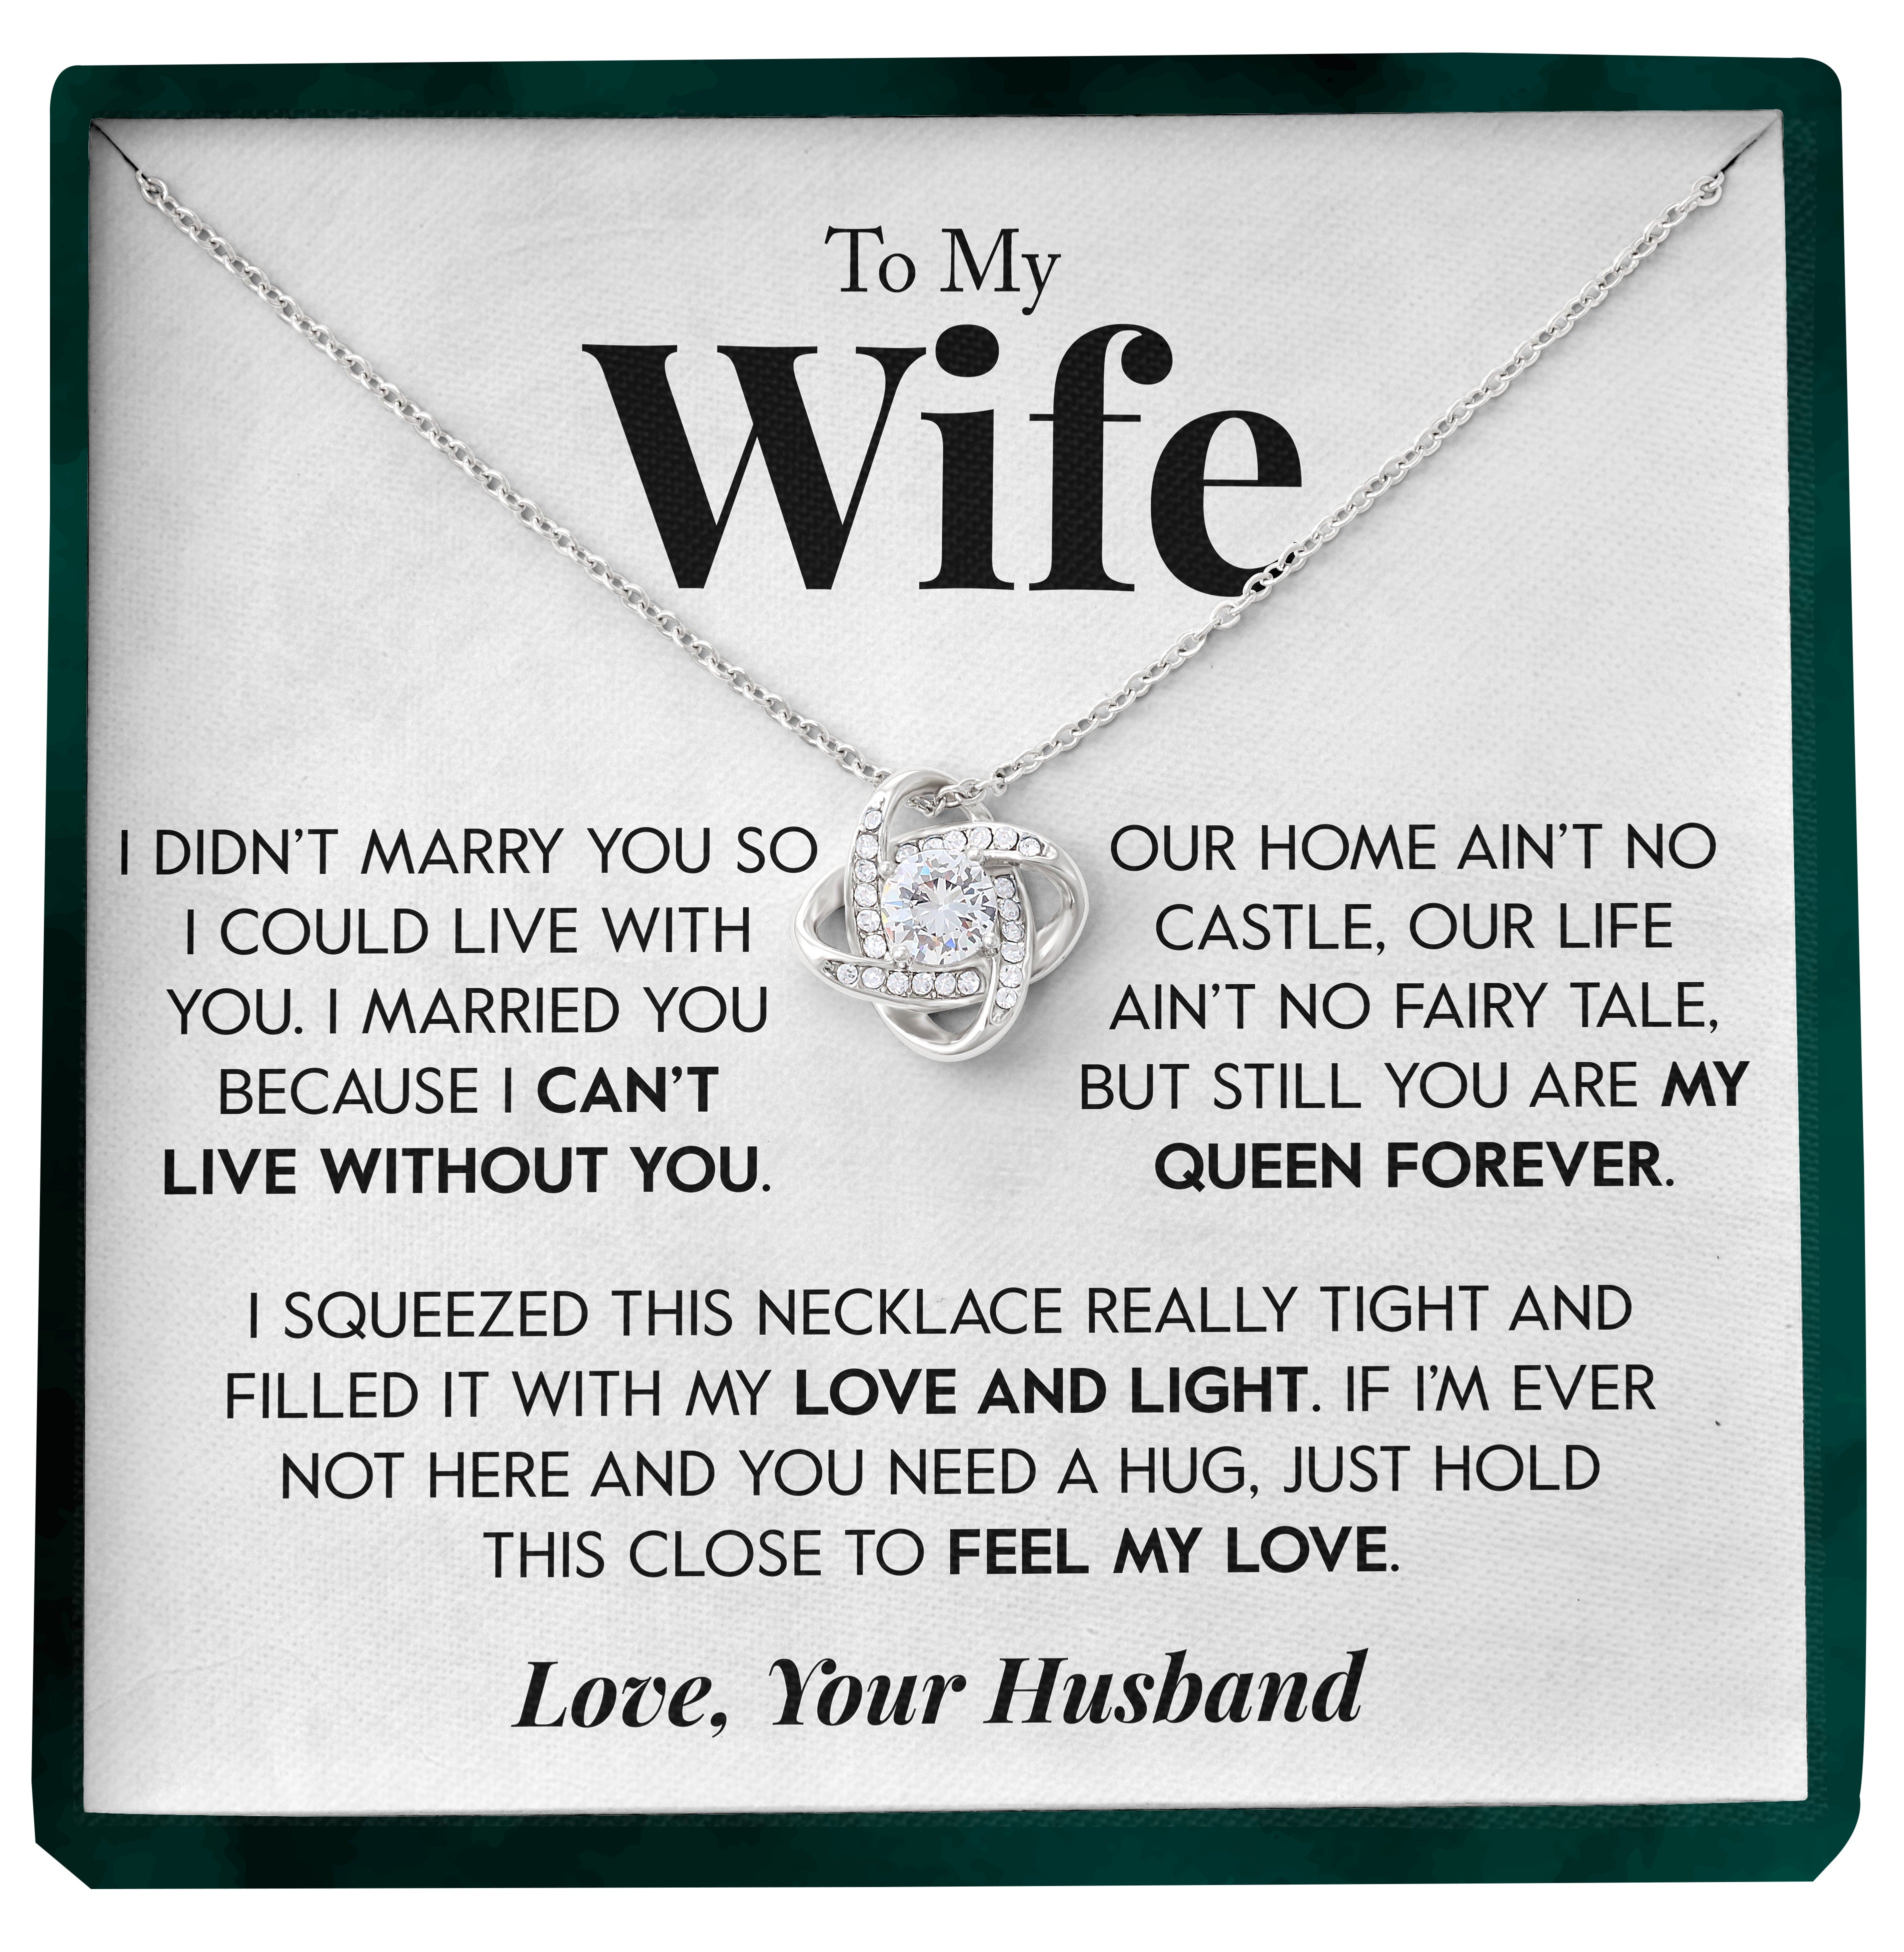 To My Wife | "My Queen Forever" | Love Knot Necklace